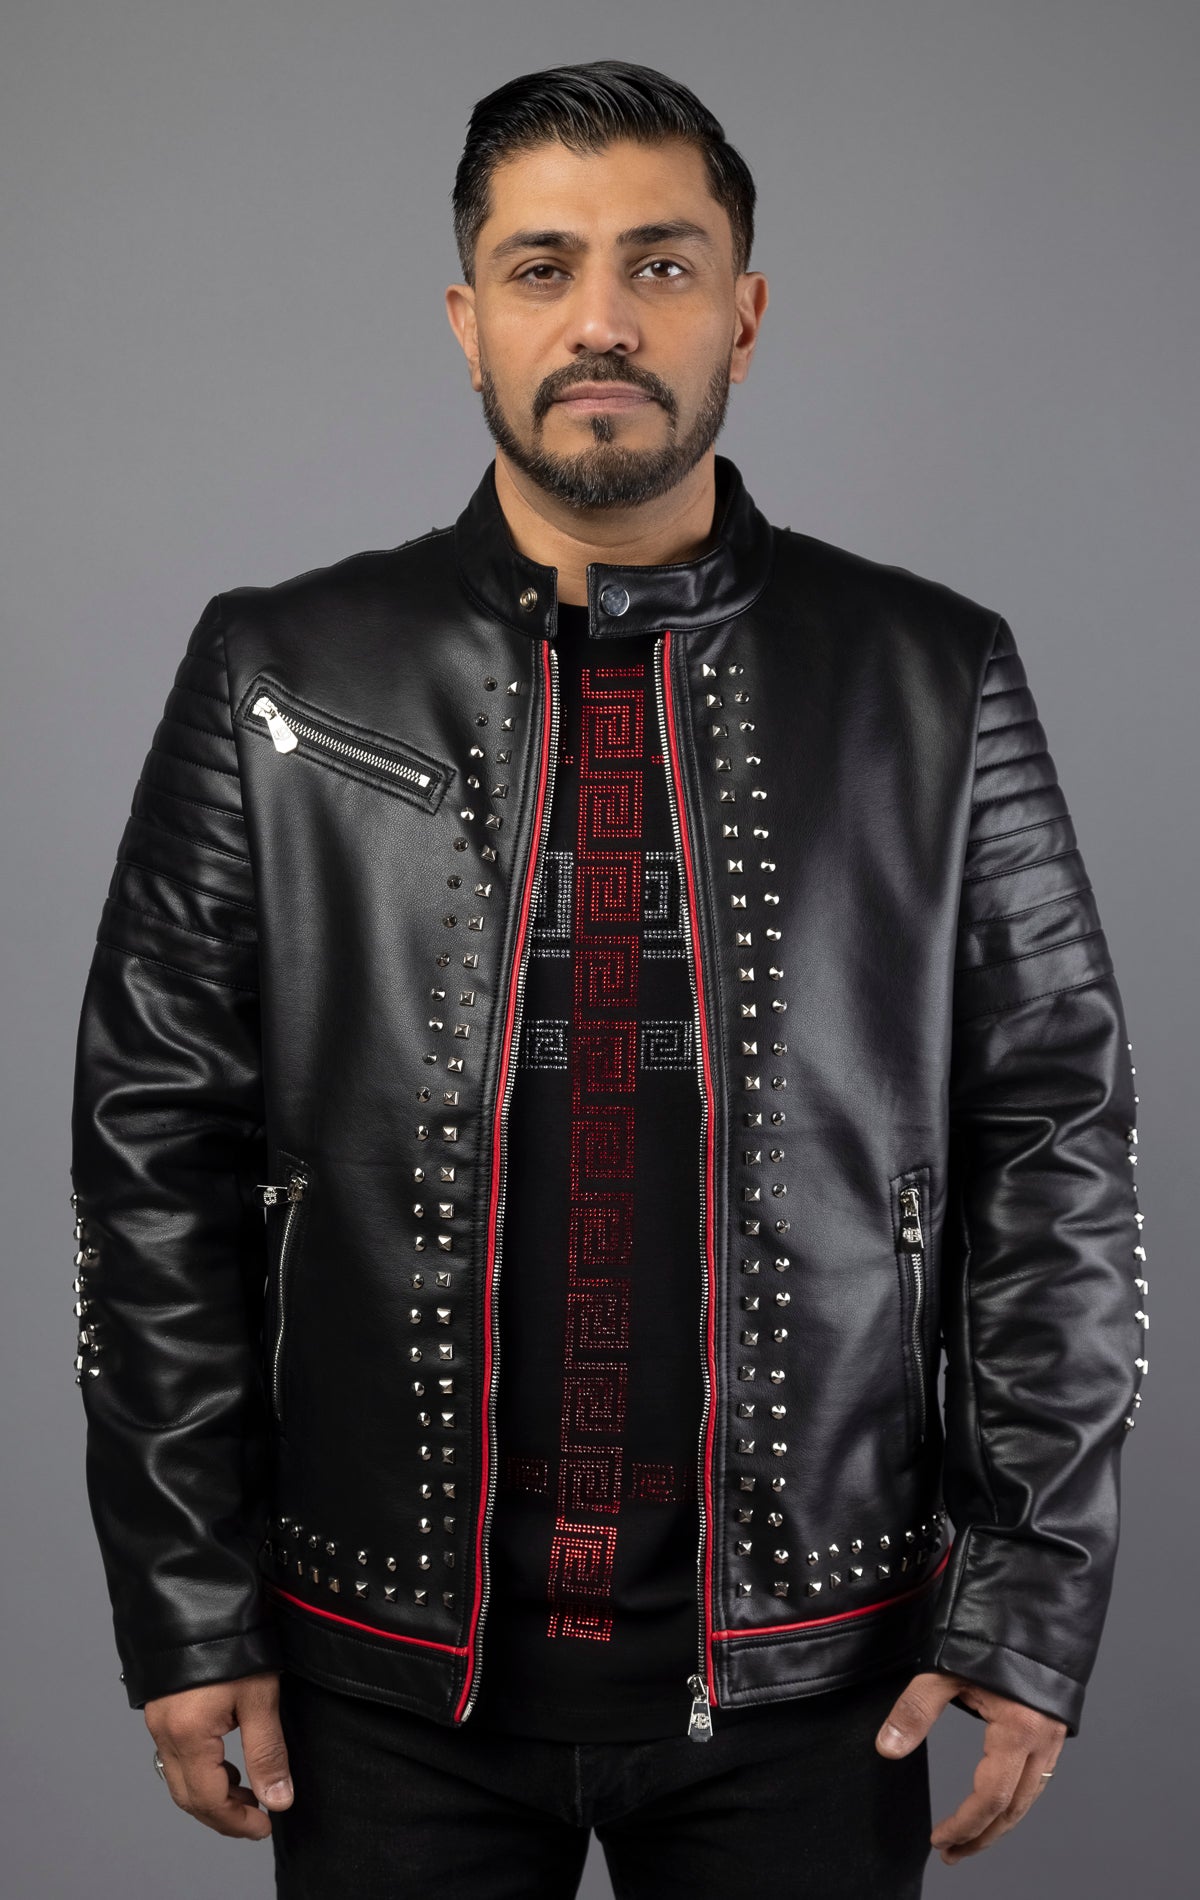 This leather jacket features red piping and intricate embroidery patches, as well as top-quality silver studs. Made with soft, genuine cowhide leather, this rock punk style jacket includes two side pockets. Color: black.